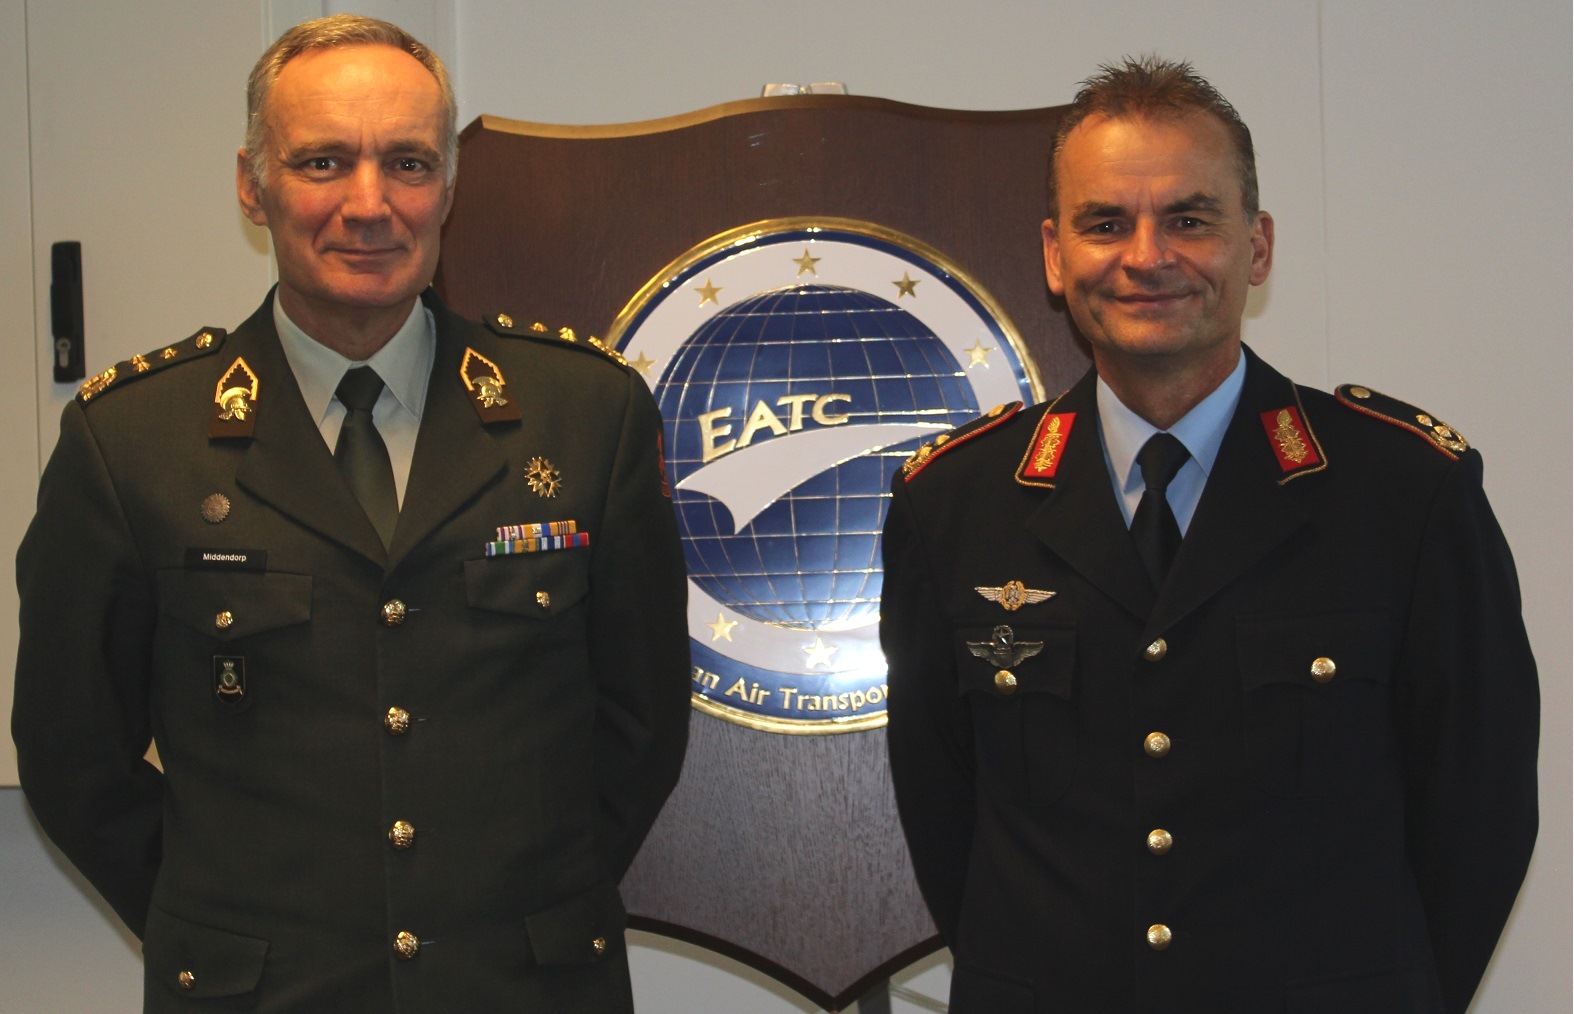 Dutch Chief of Defence visits the EATC